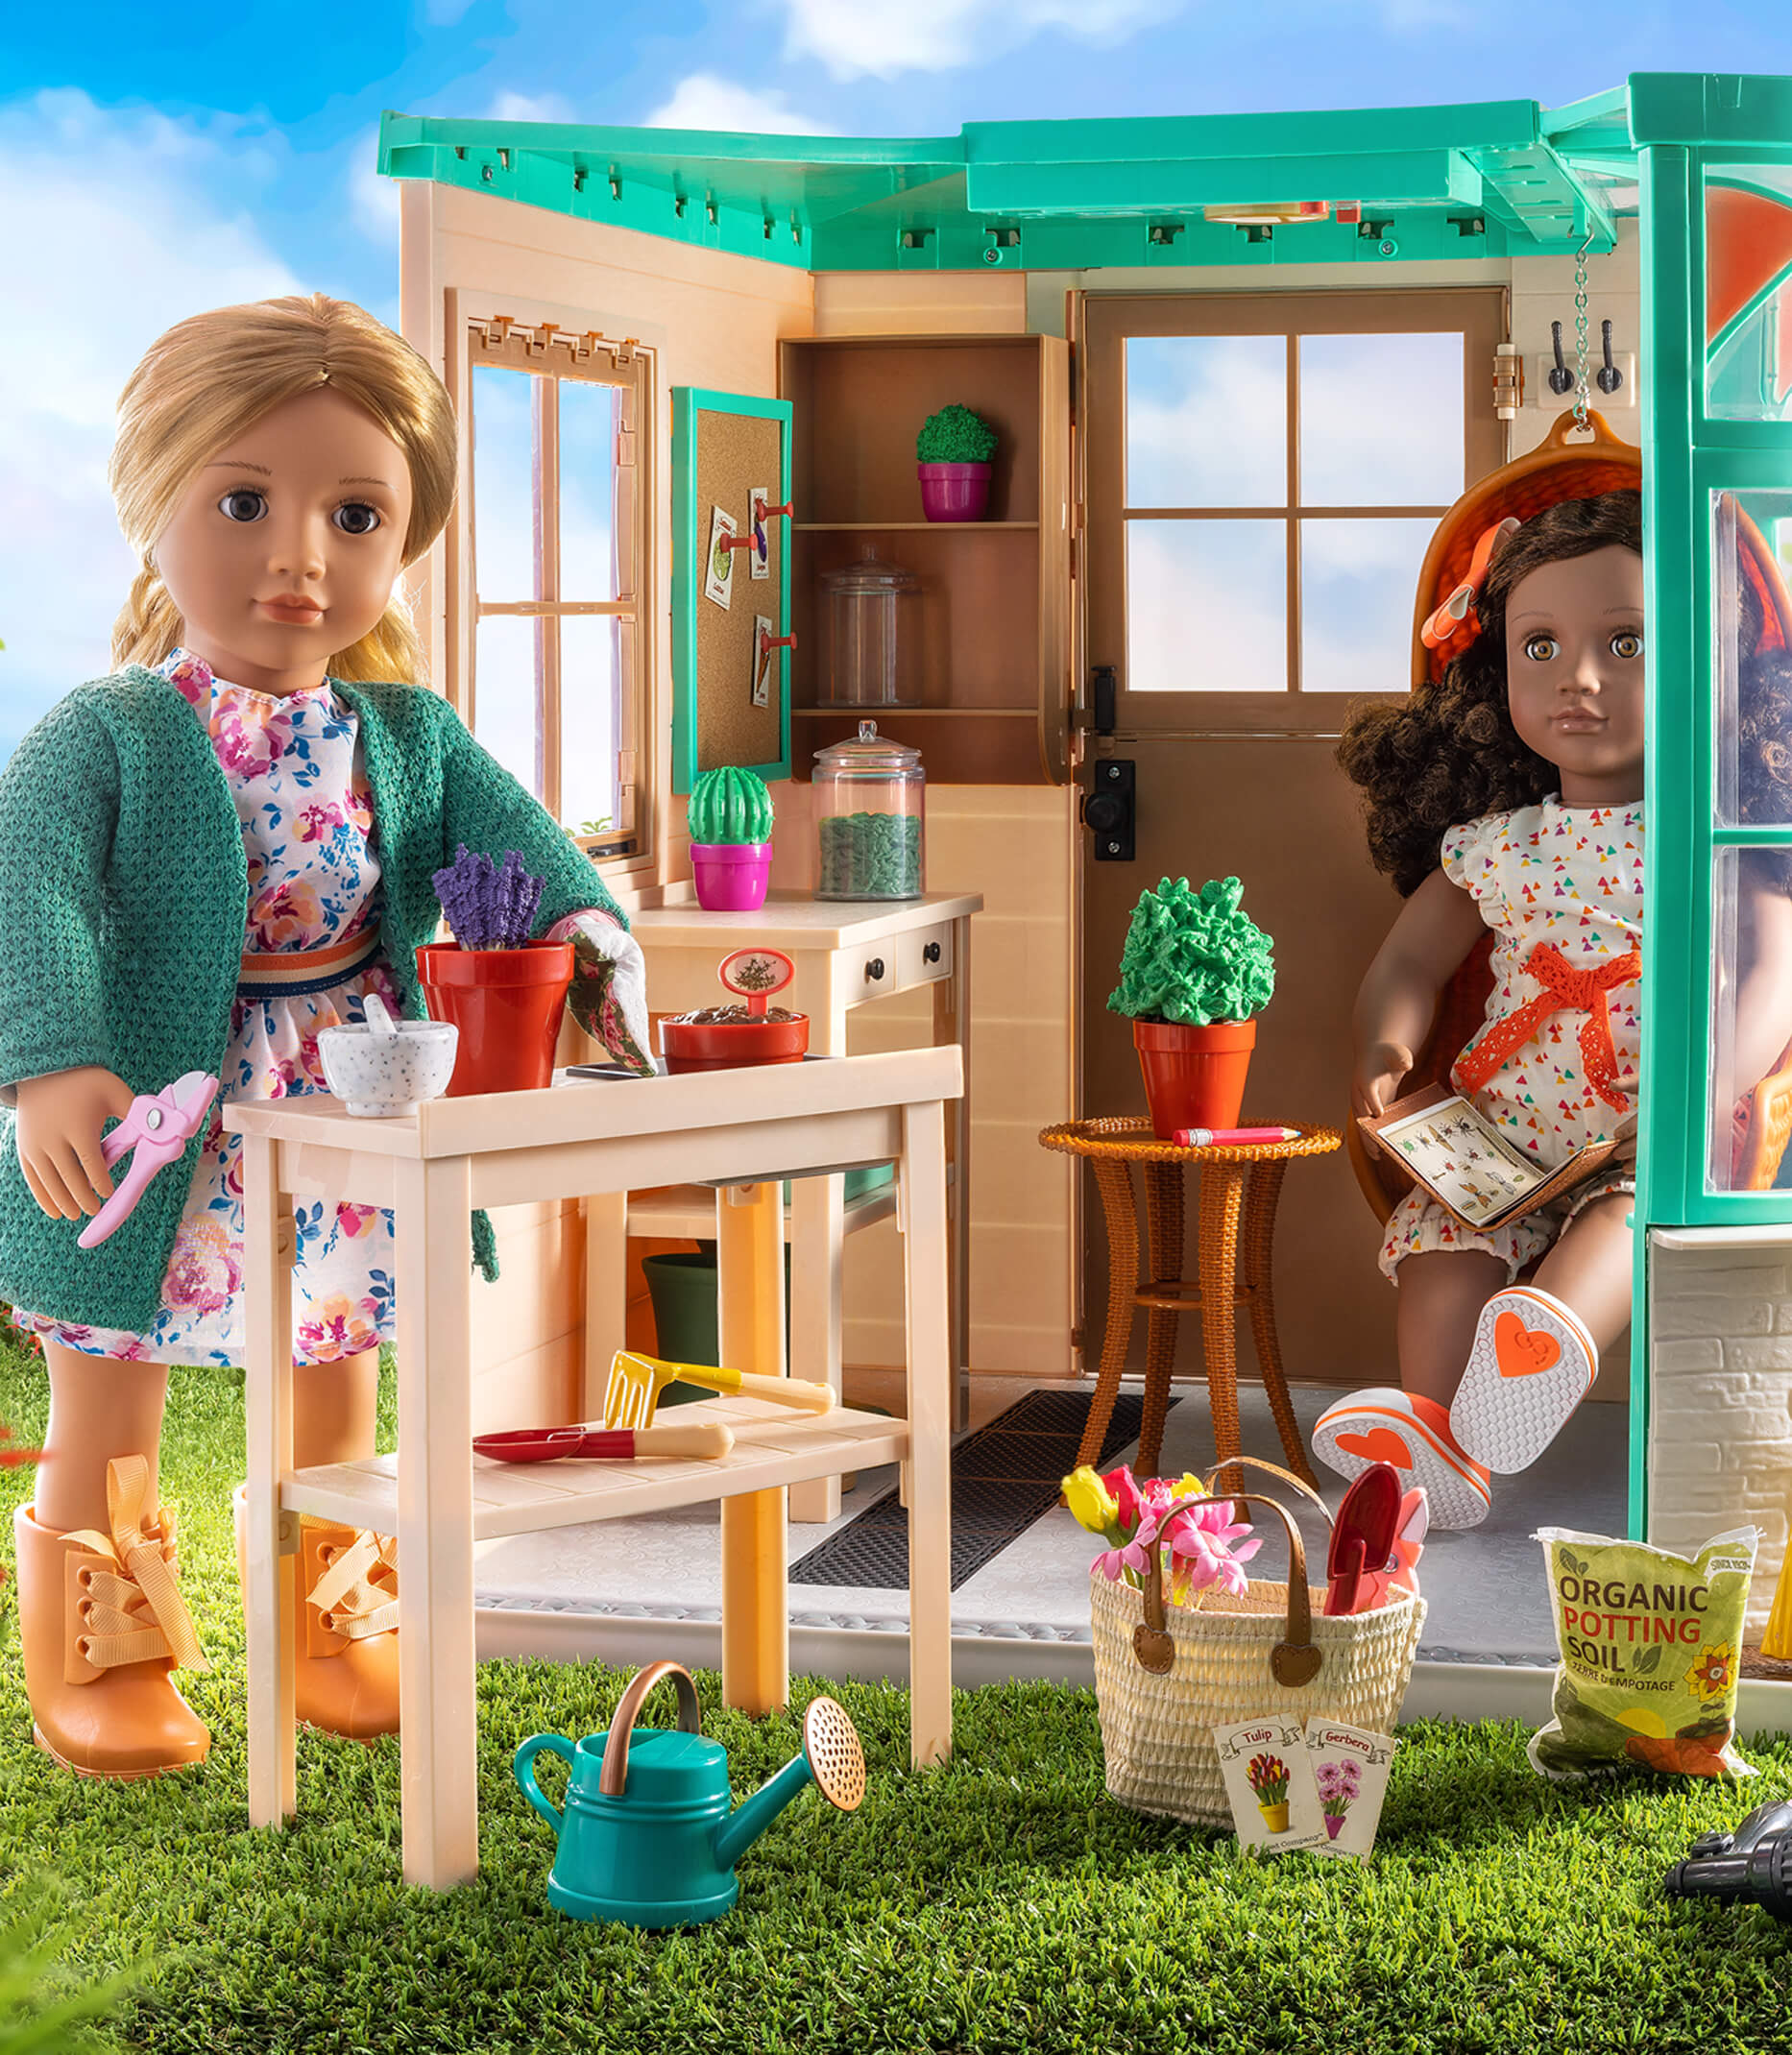 Dolls, Furniture & Accessories for Girls | Our Generation